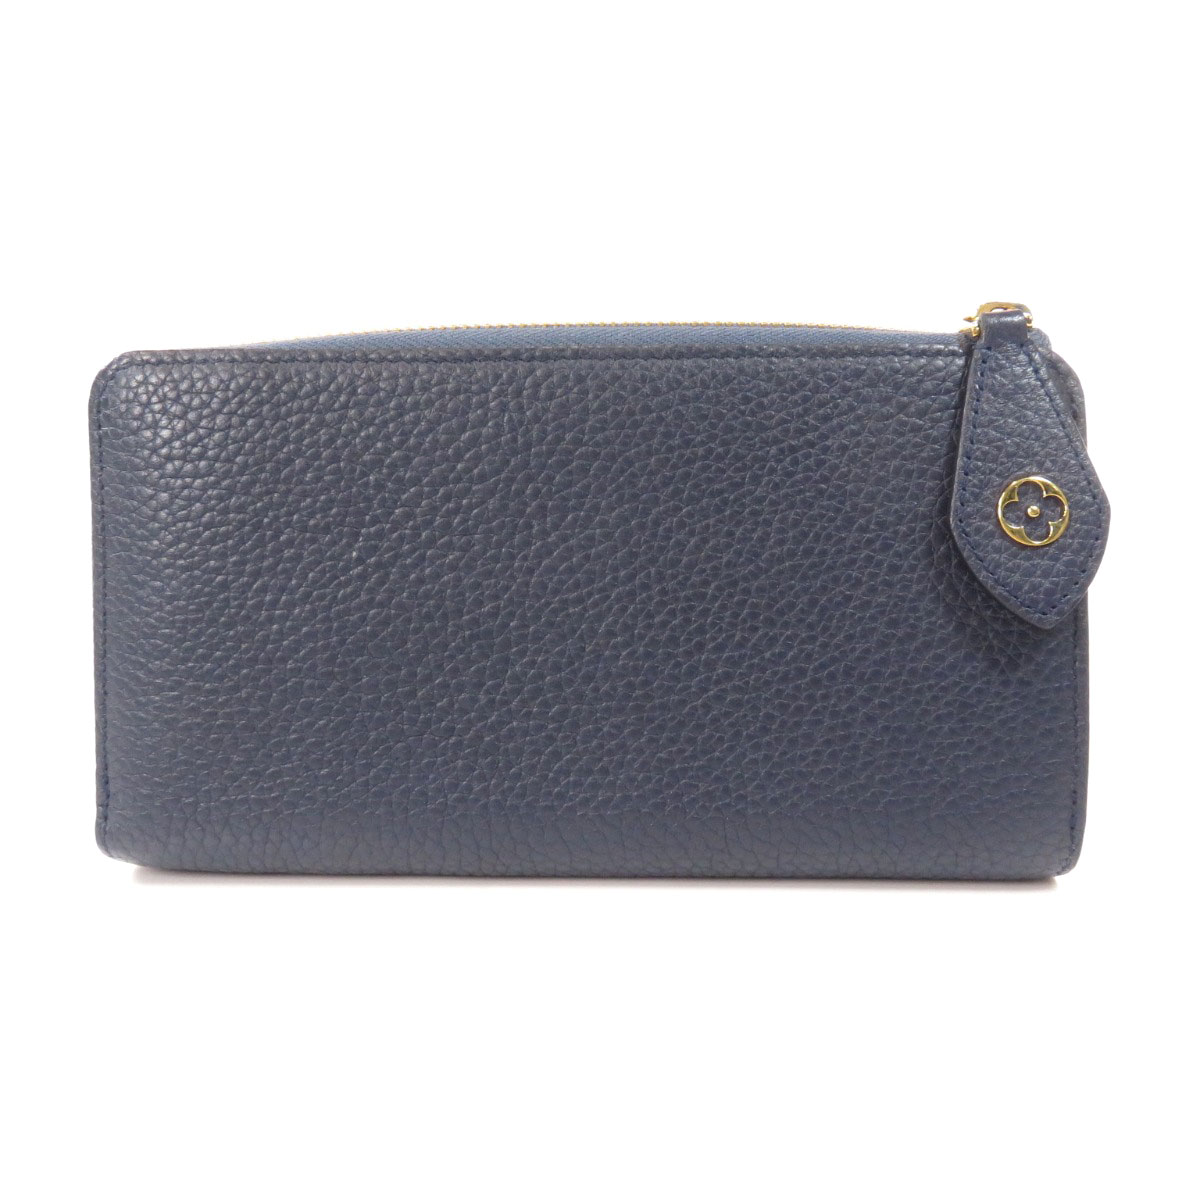 LOUIS VUITTON M68582 Long wallet (with Coin Pocket) Portefeiulle/Comet ...